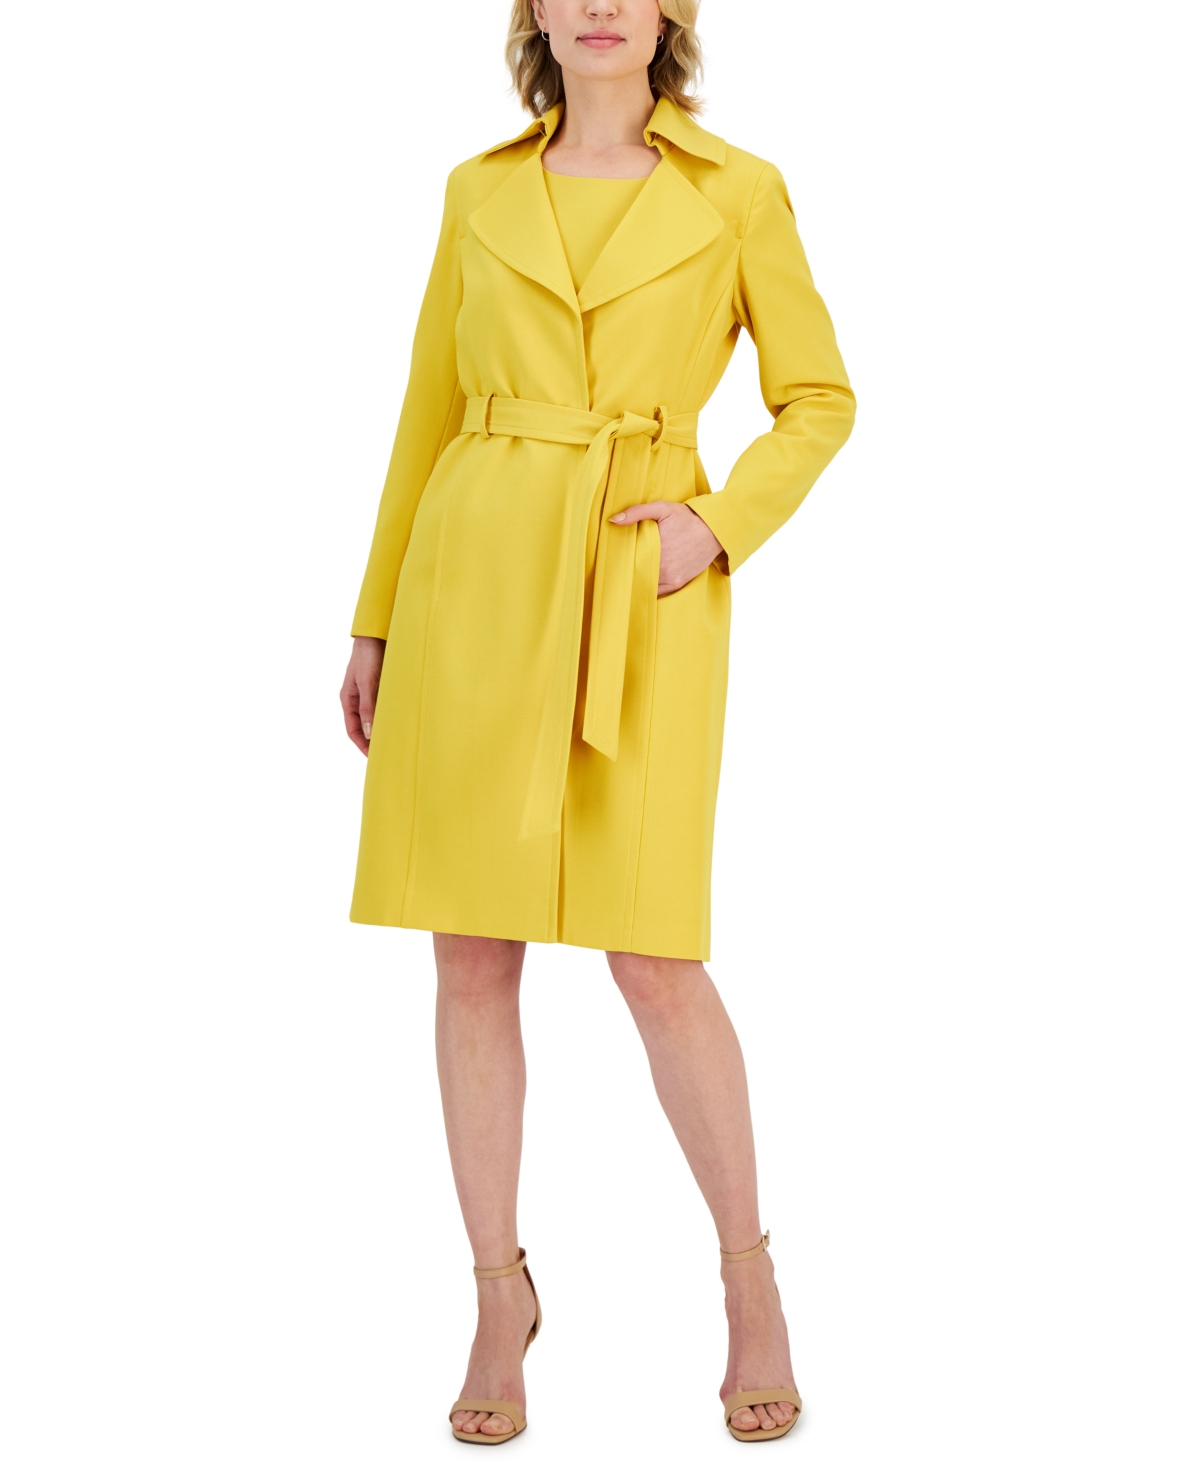 Le Suit Women's Crepe Belted Trench Jacket & Sheath Dress Suit, Regular And Petite Sizes In Golden Sunset